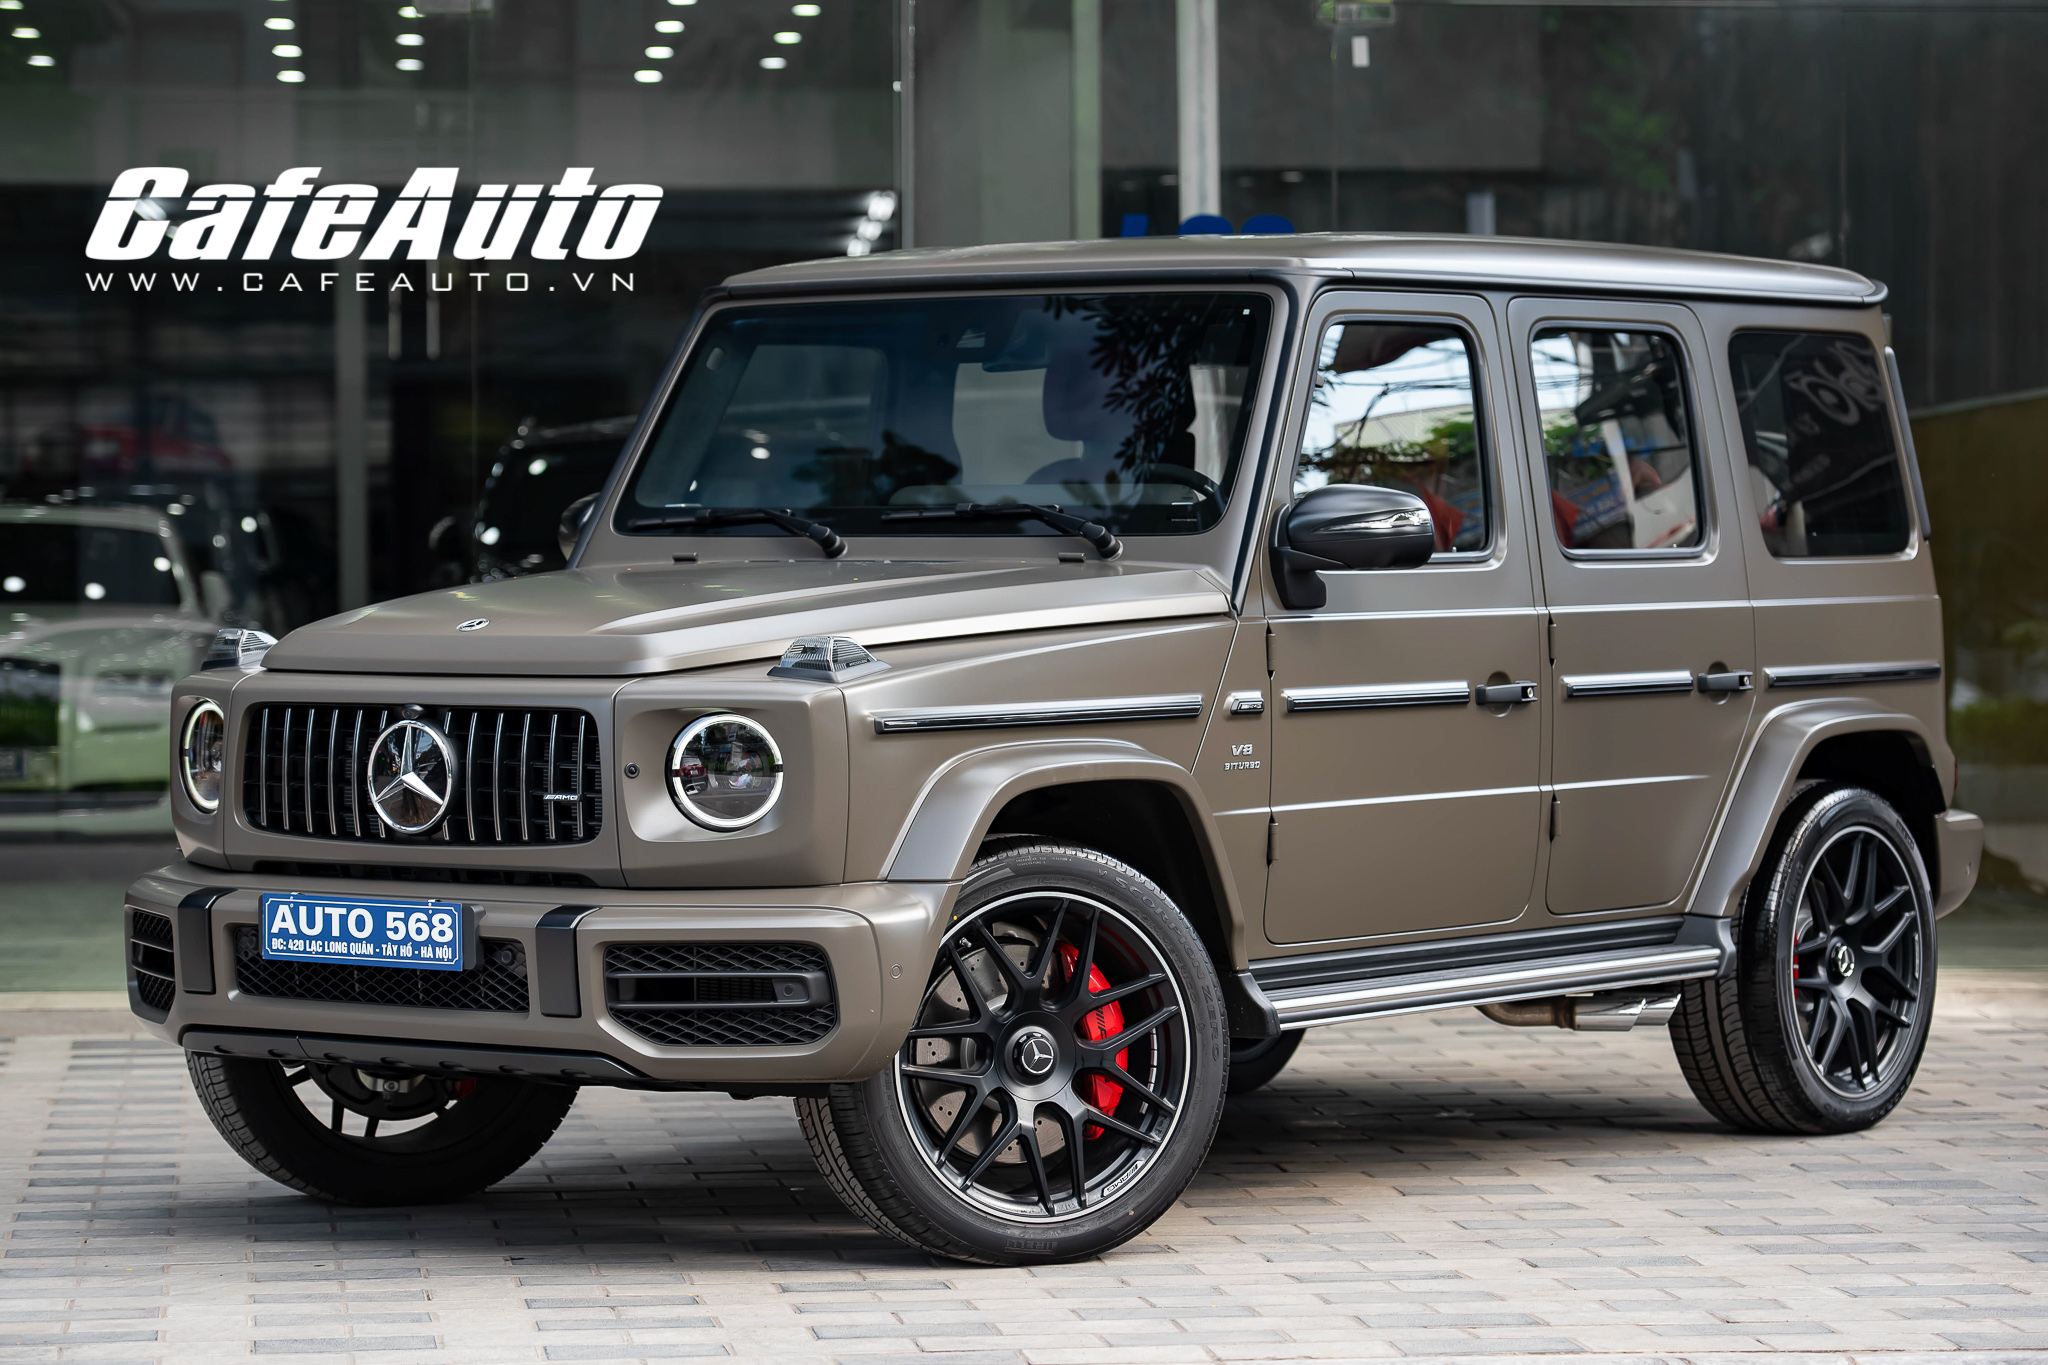 mercedes-amg-g-63-phan-phoi-chinh-hang-cafeautovn-13